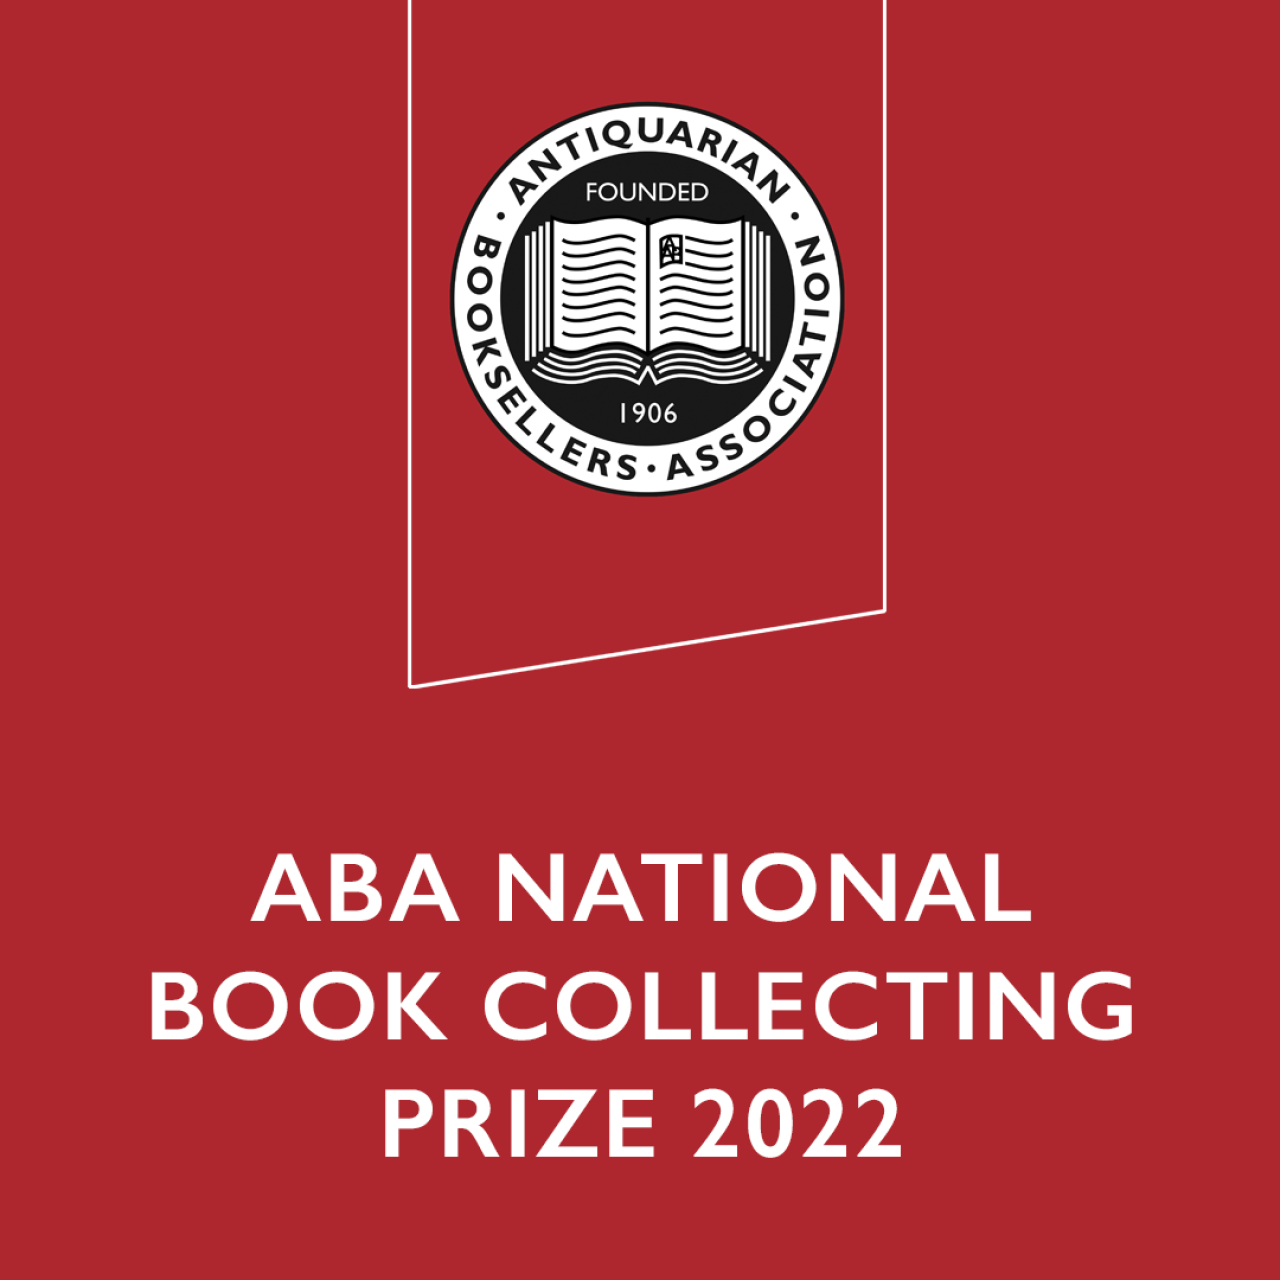 Aba book collecting prize